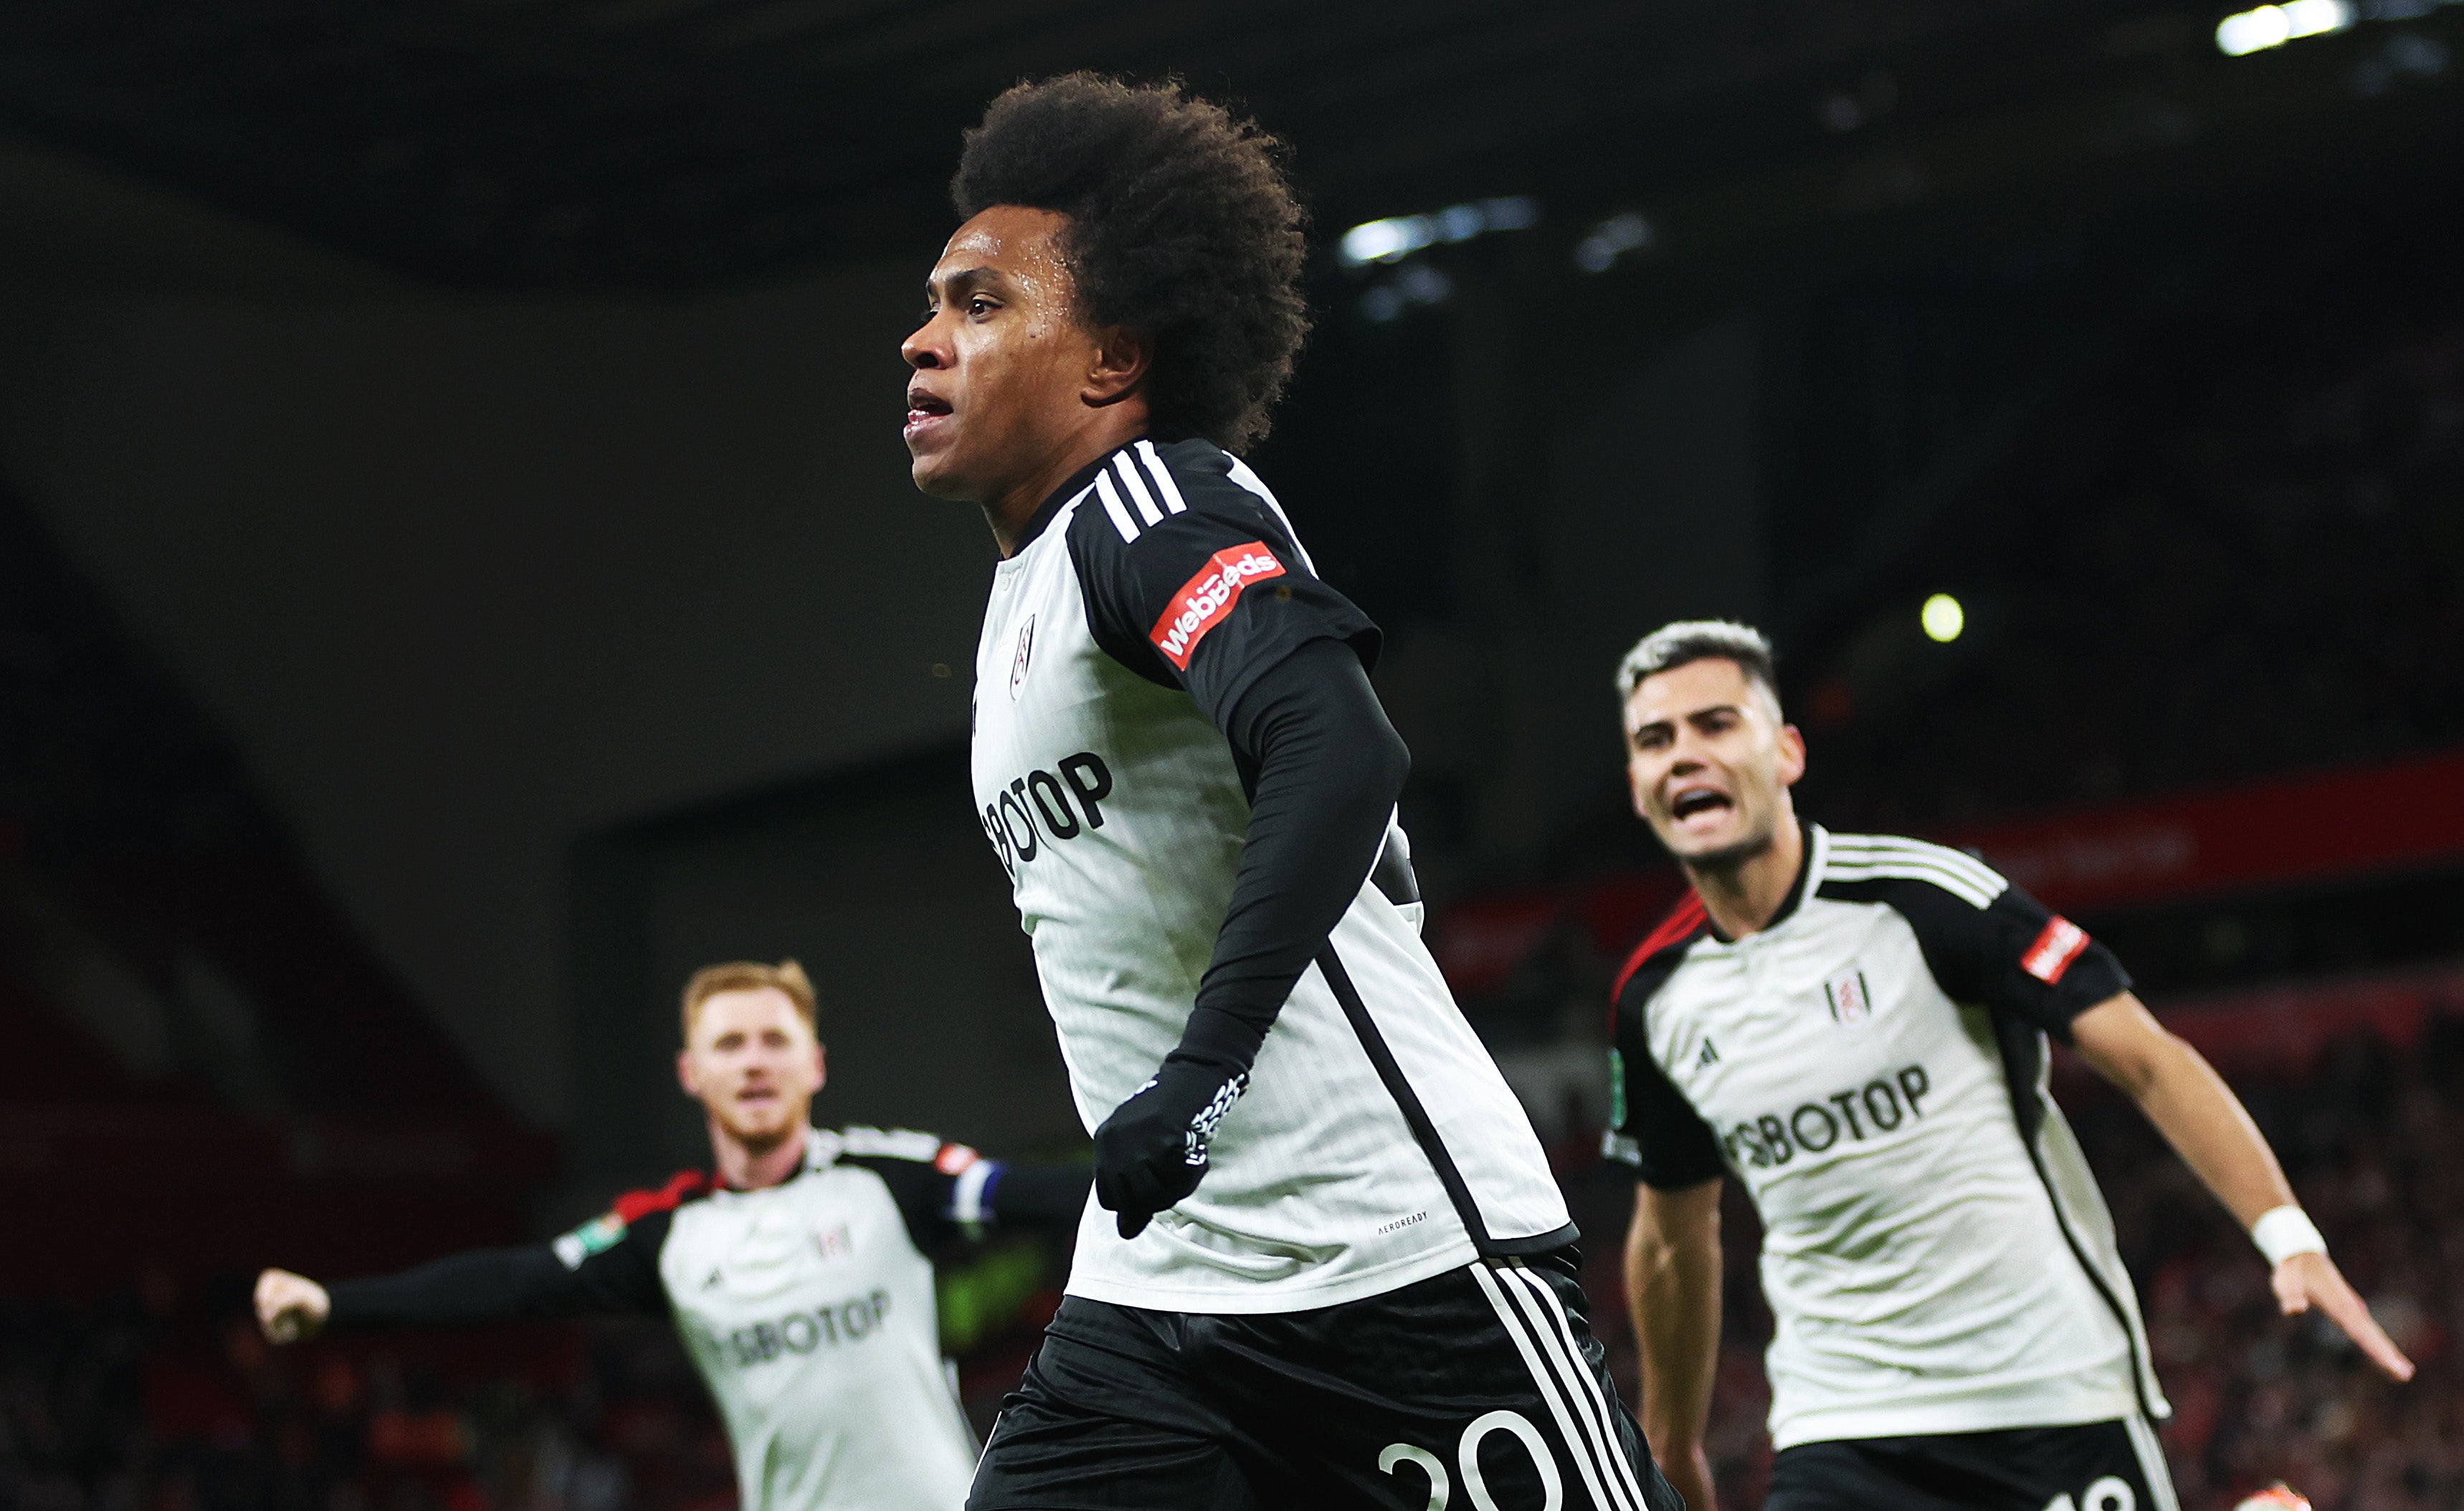 Willian fired Fulham into a first-half lead